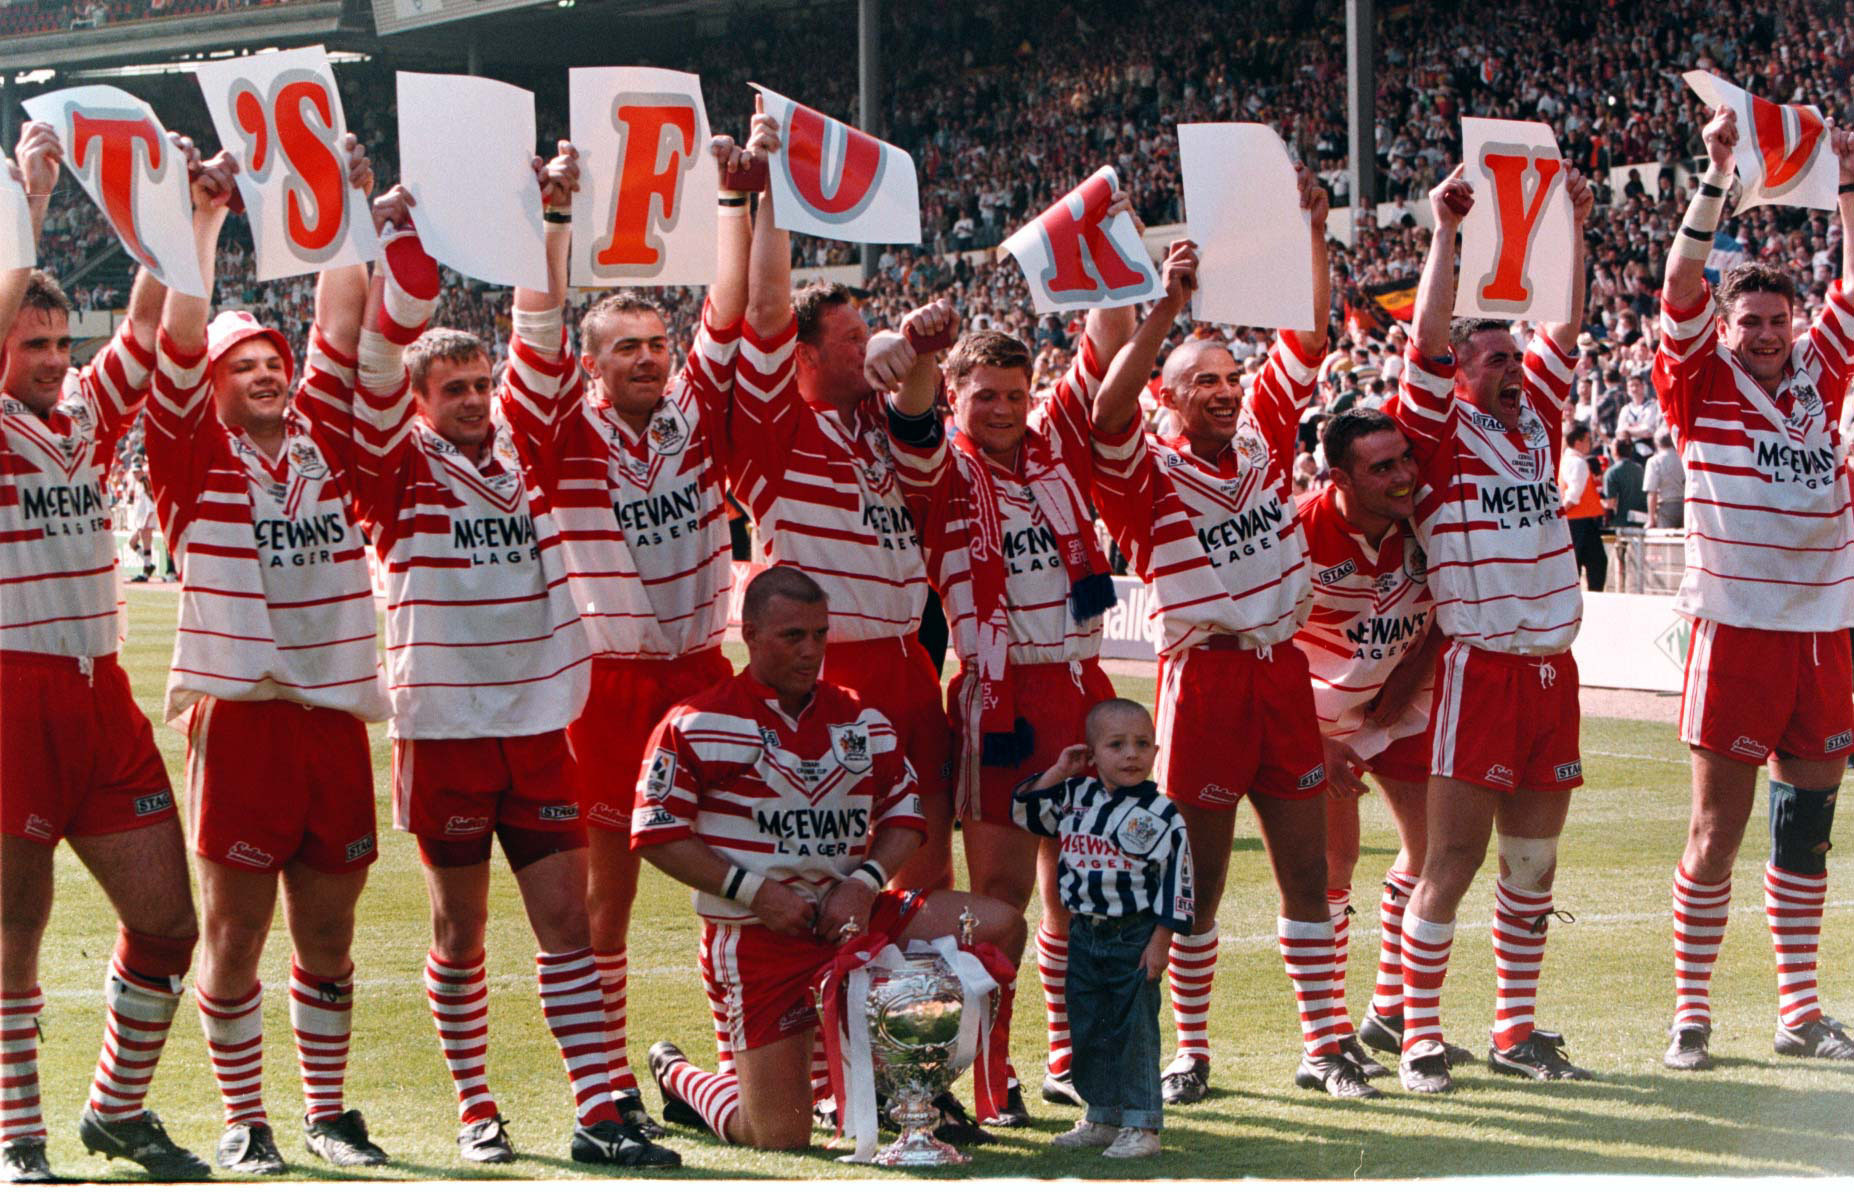 St Helens team and mascot, (team captain Bobbie Goldings son, Bobbie), celebrate their victory at Wembley today over Bradford Bulls in the Silk Cut Challenge Cup.